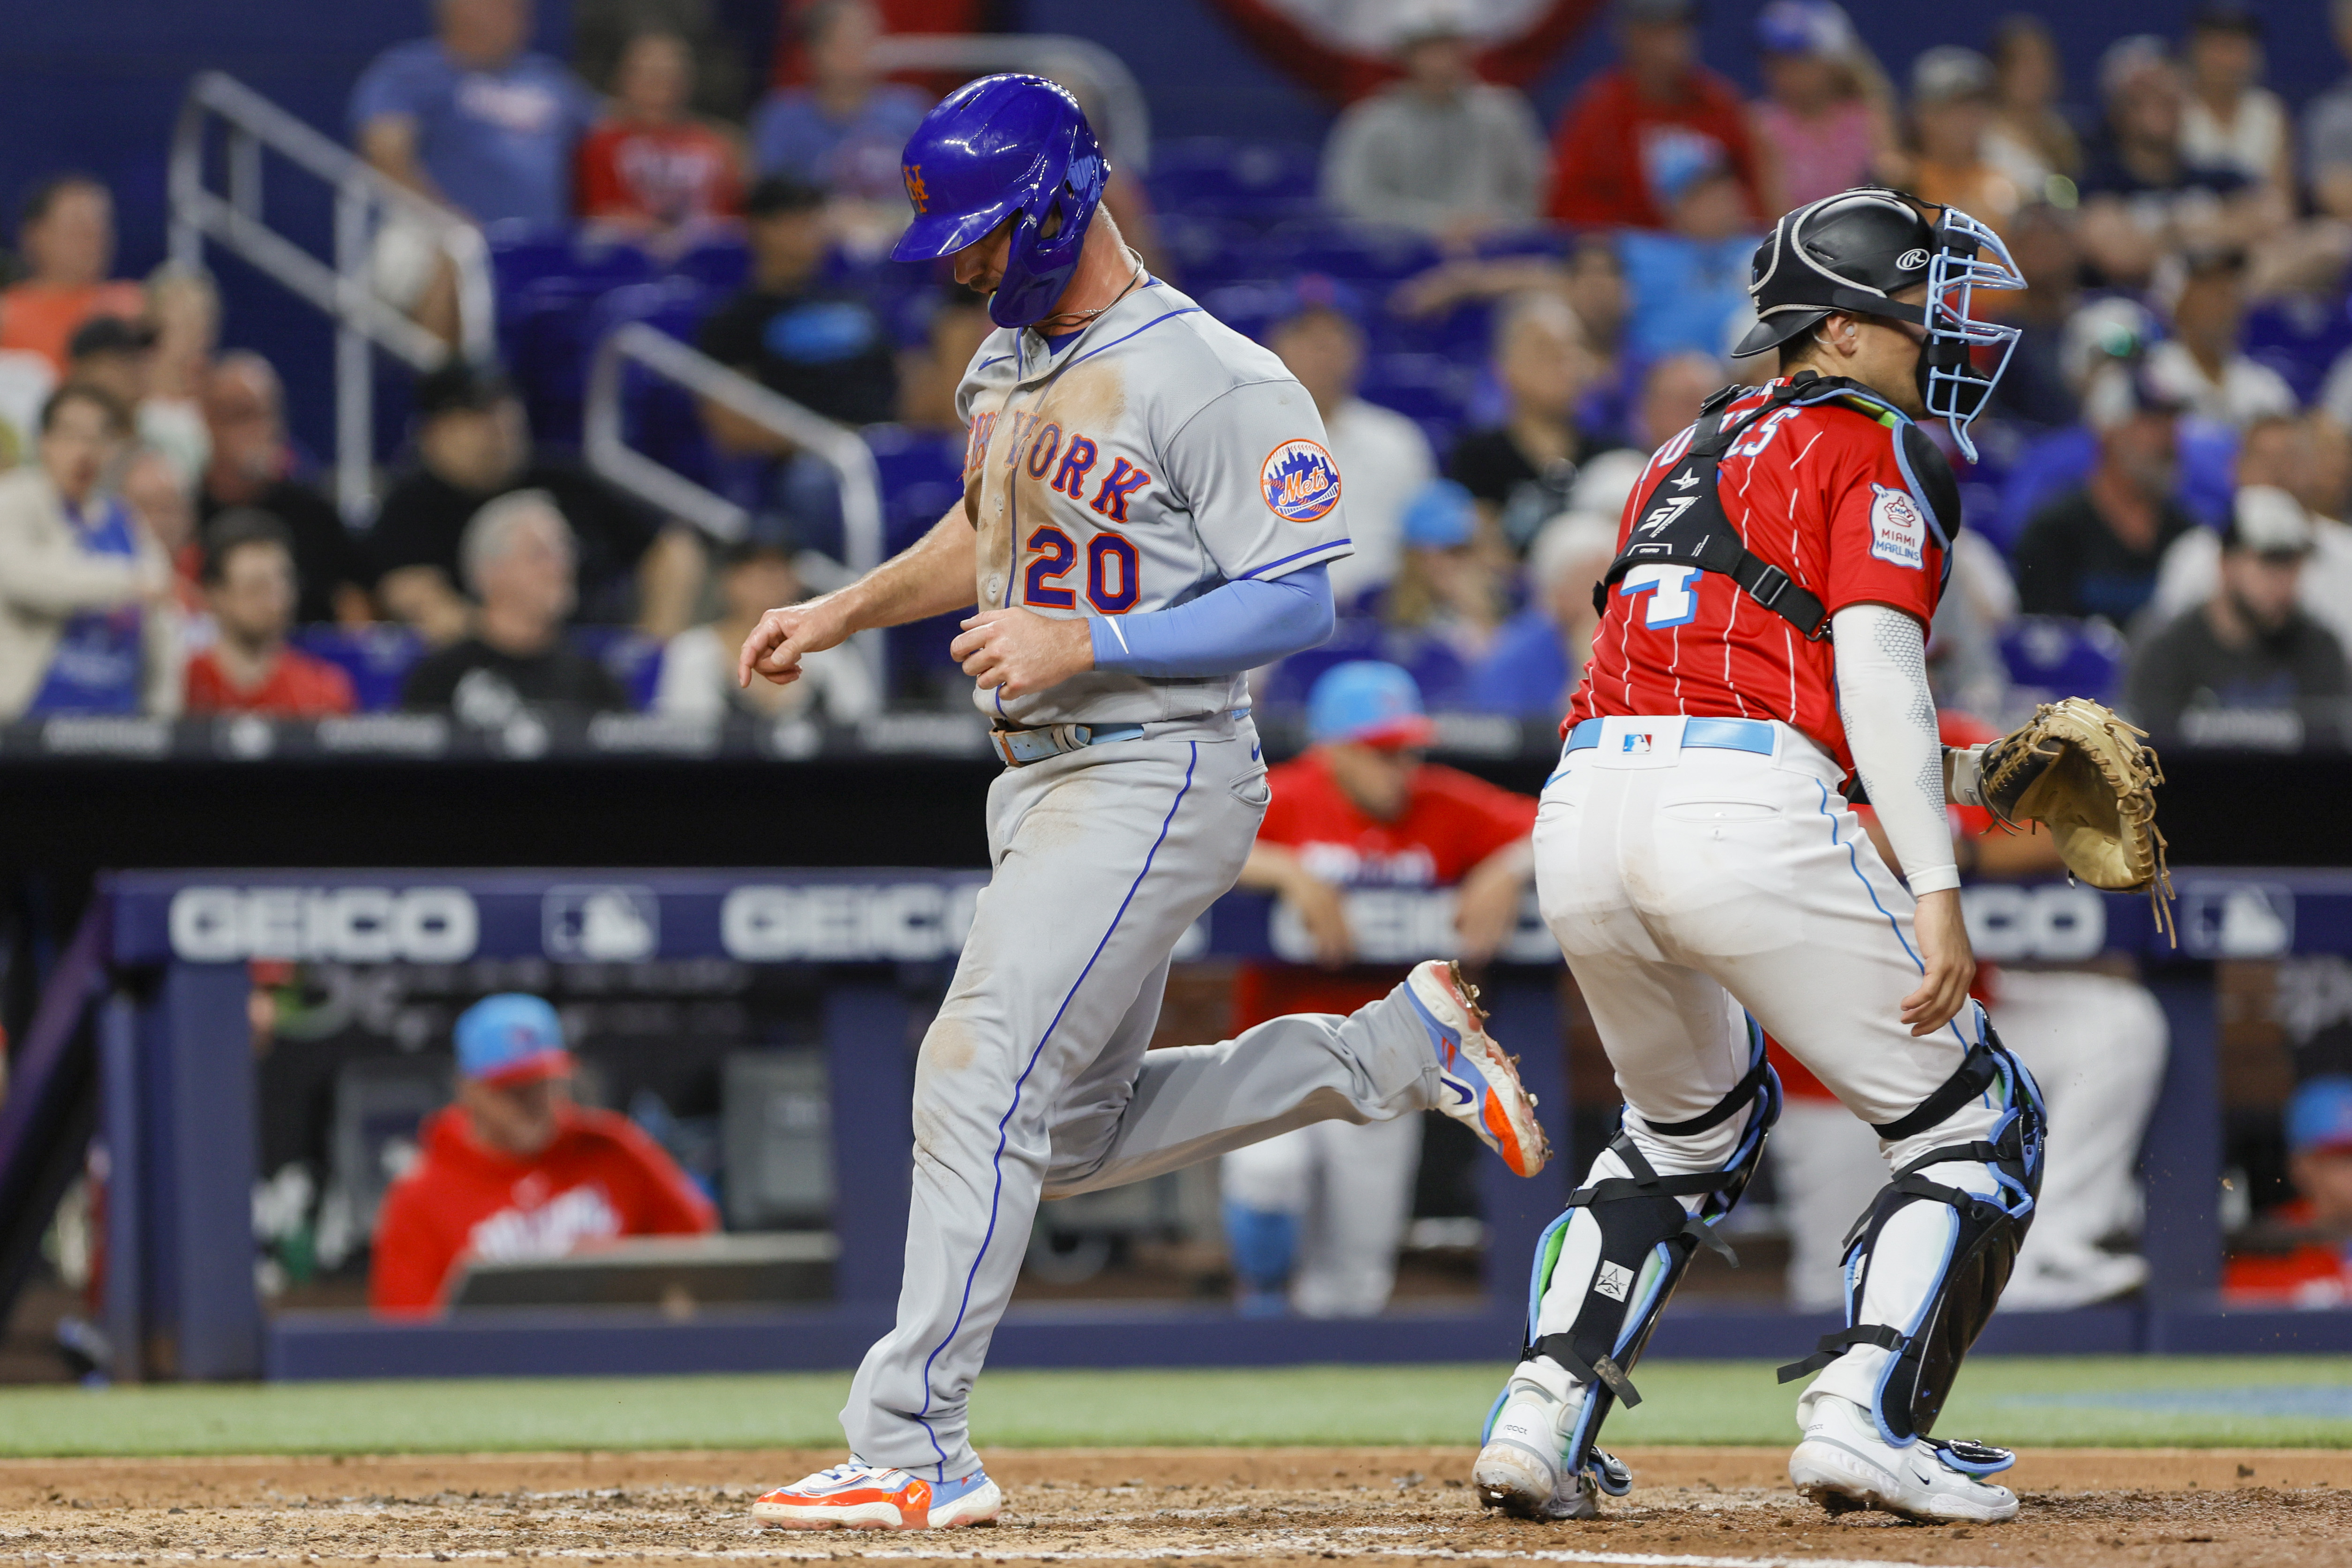 New York Mets first baseman Pete Alonso (20) scores after an RBI single from left fielder Mark Canha (not pictured) during the fifth inning against the Miami Marlins at loanDepot Park.